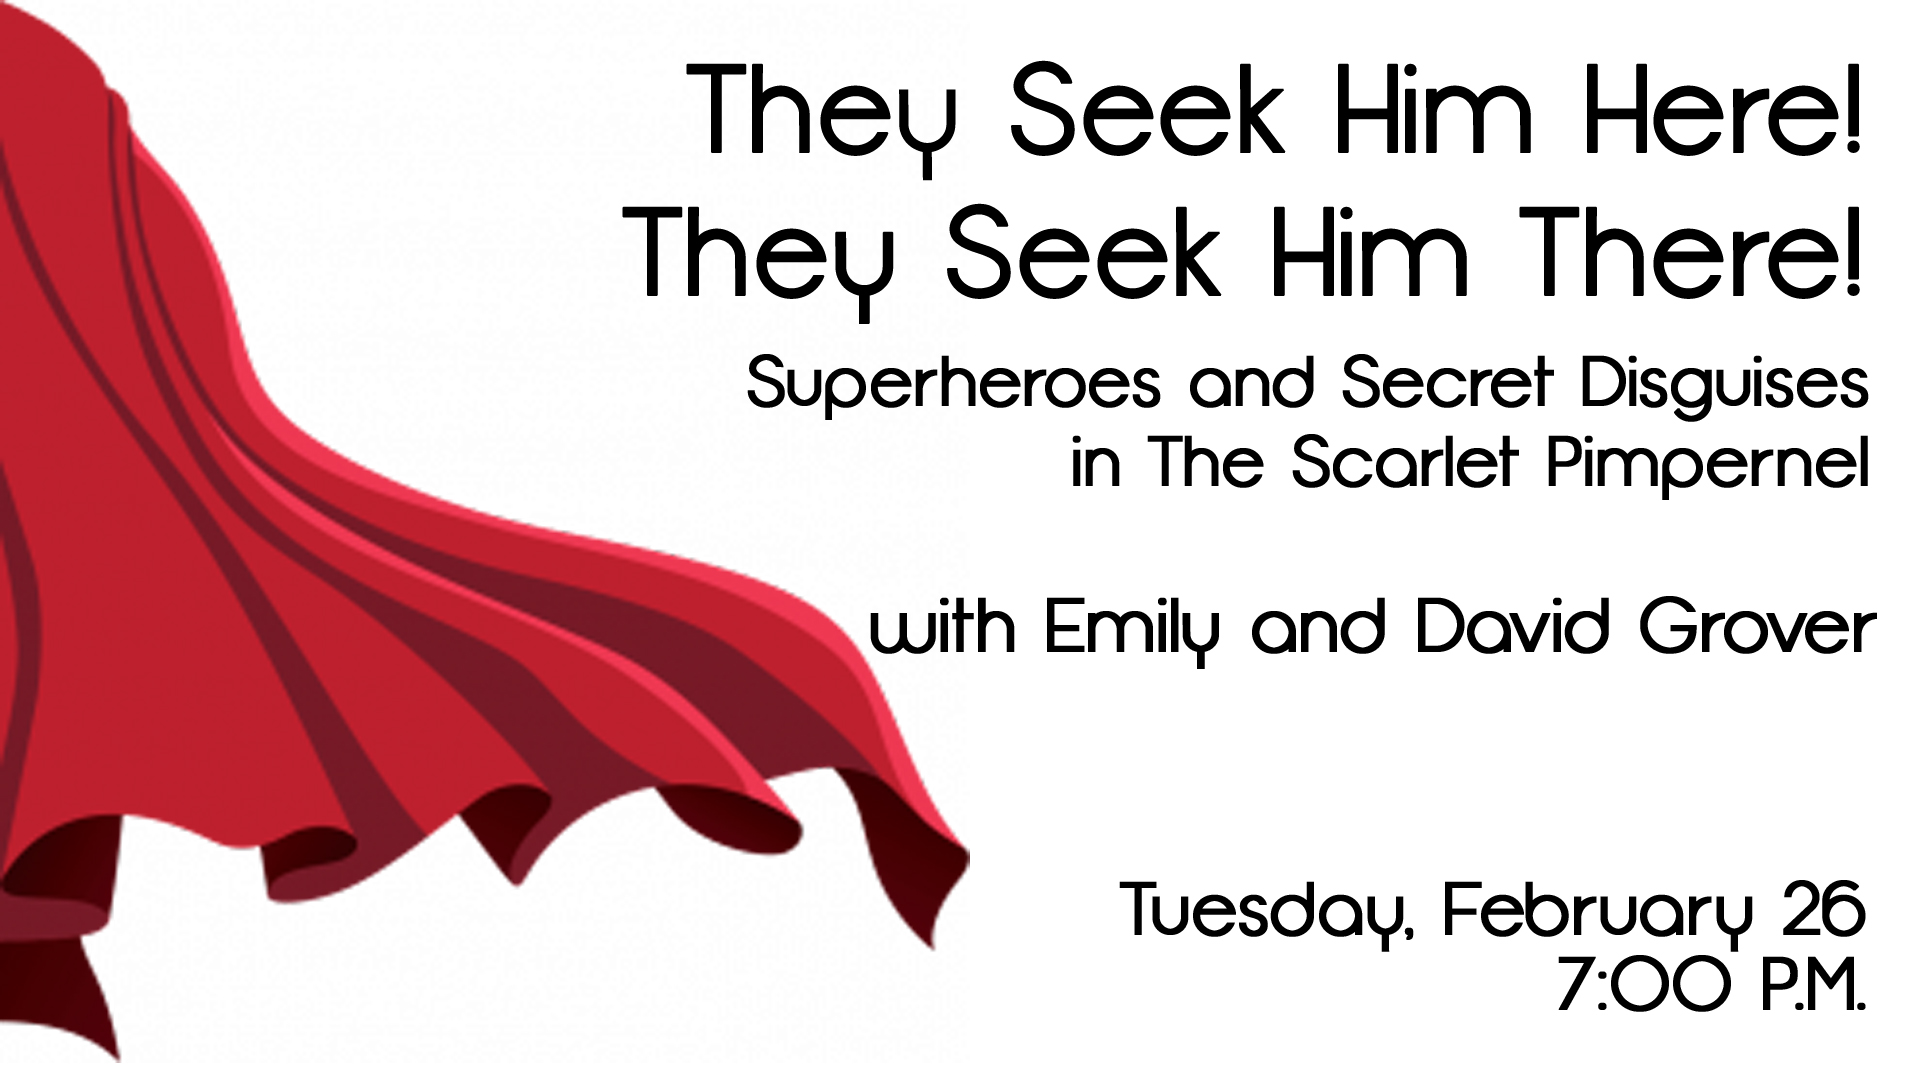 “They Seek Him Here, They Seek Him There”